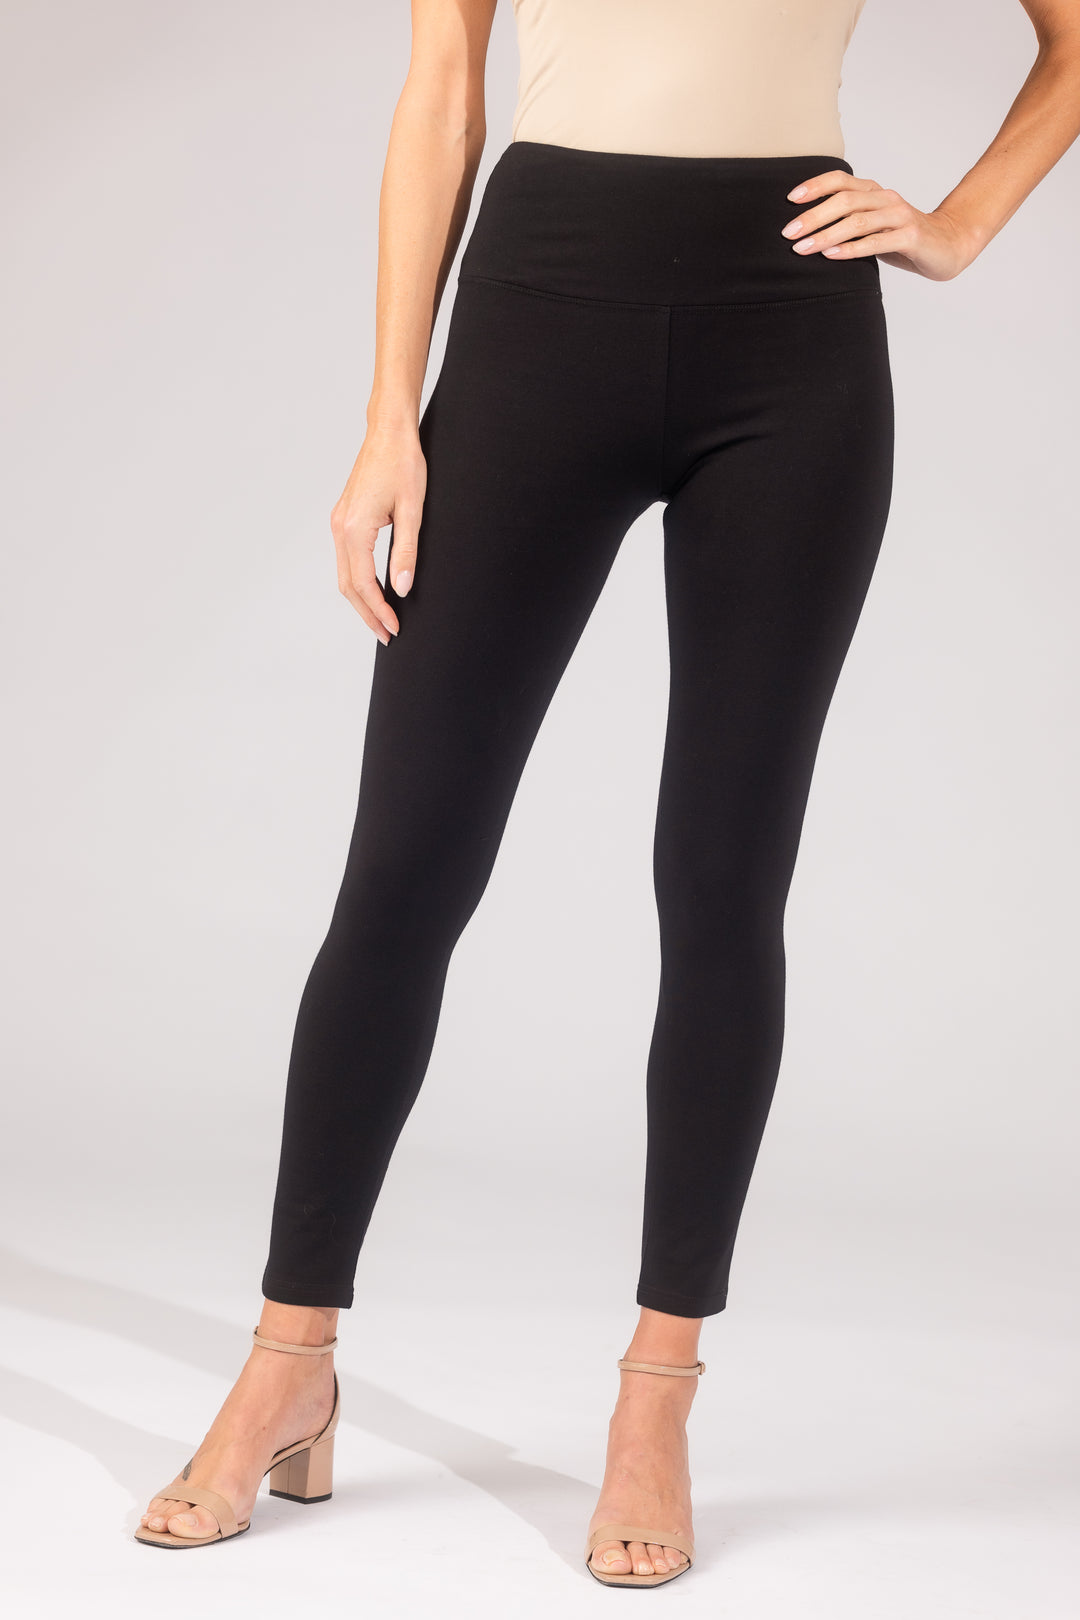 Intro Slimming Fit – Intro Pull-On Clothing Leggings Love the